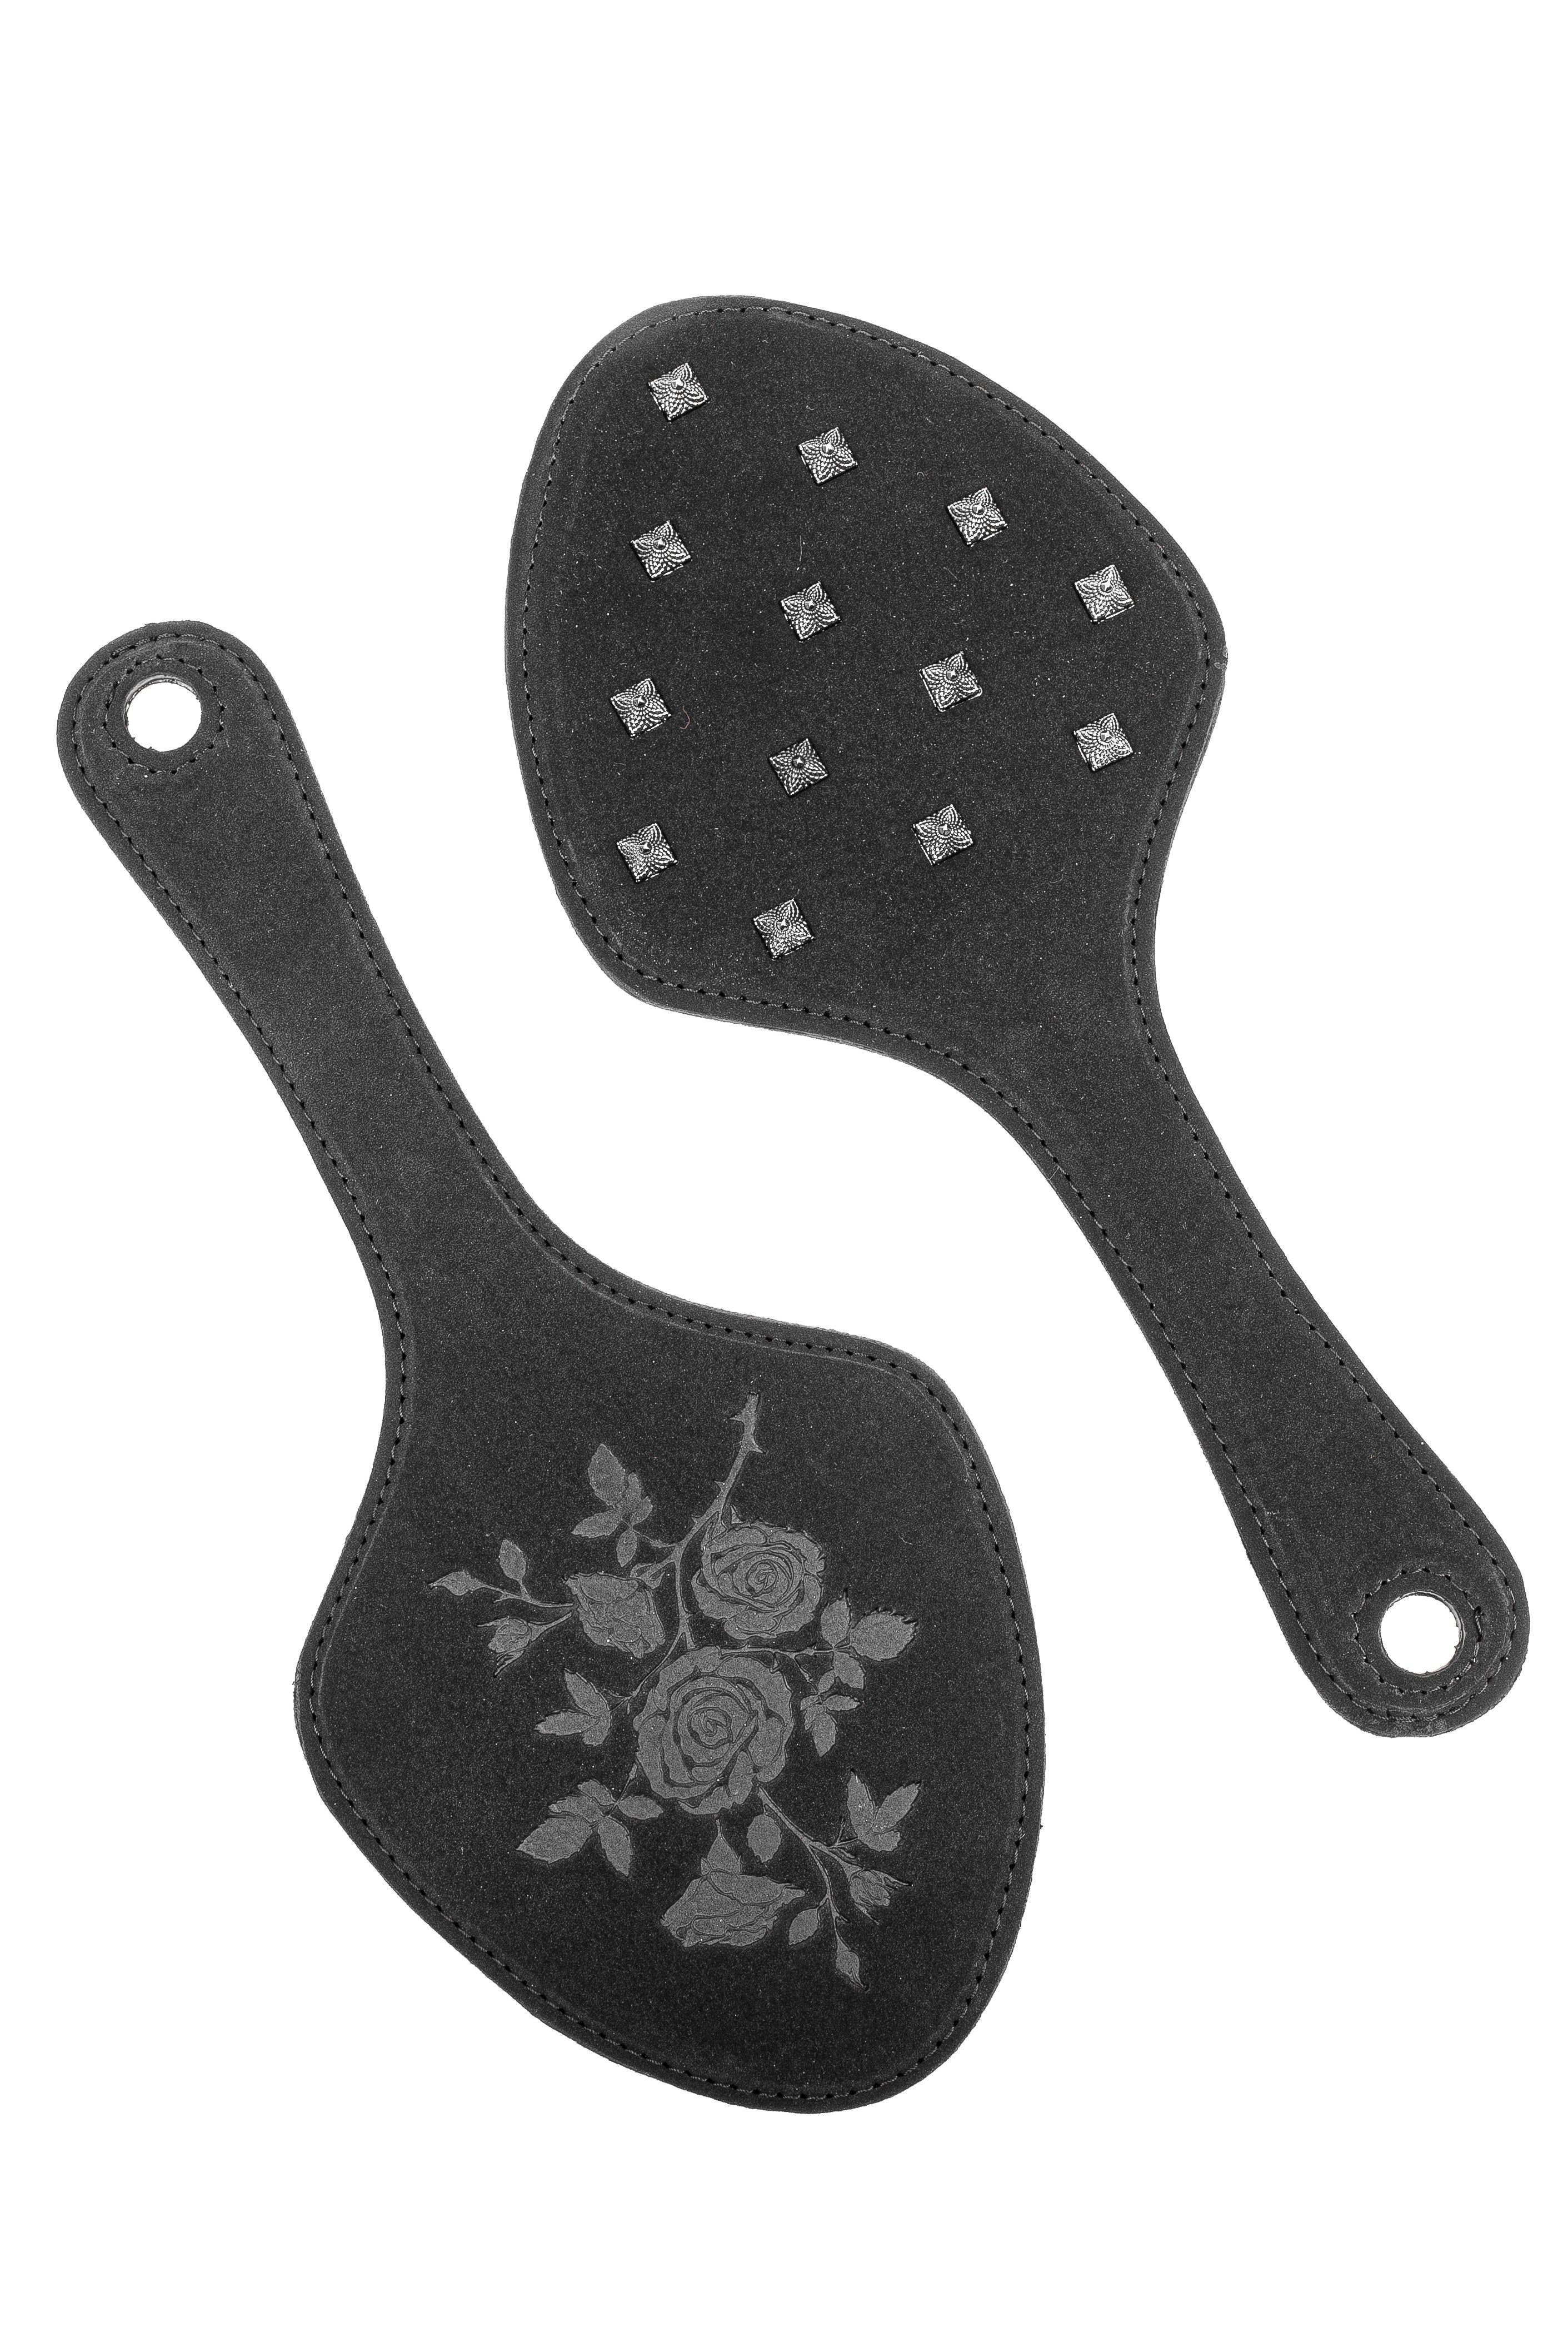 Faux Leather Spanking Paddle with Spikes